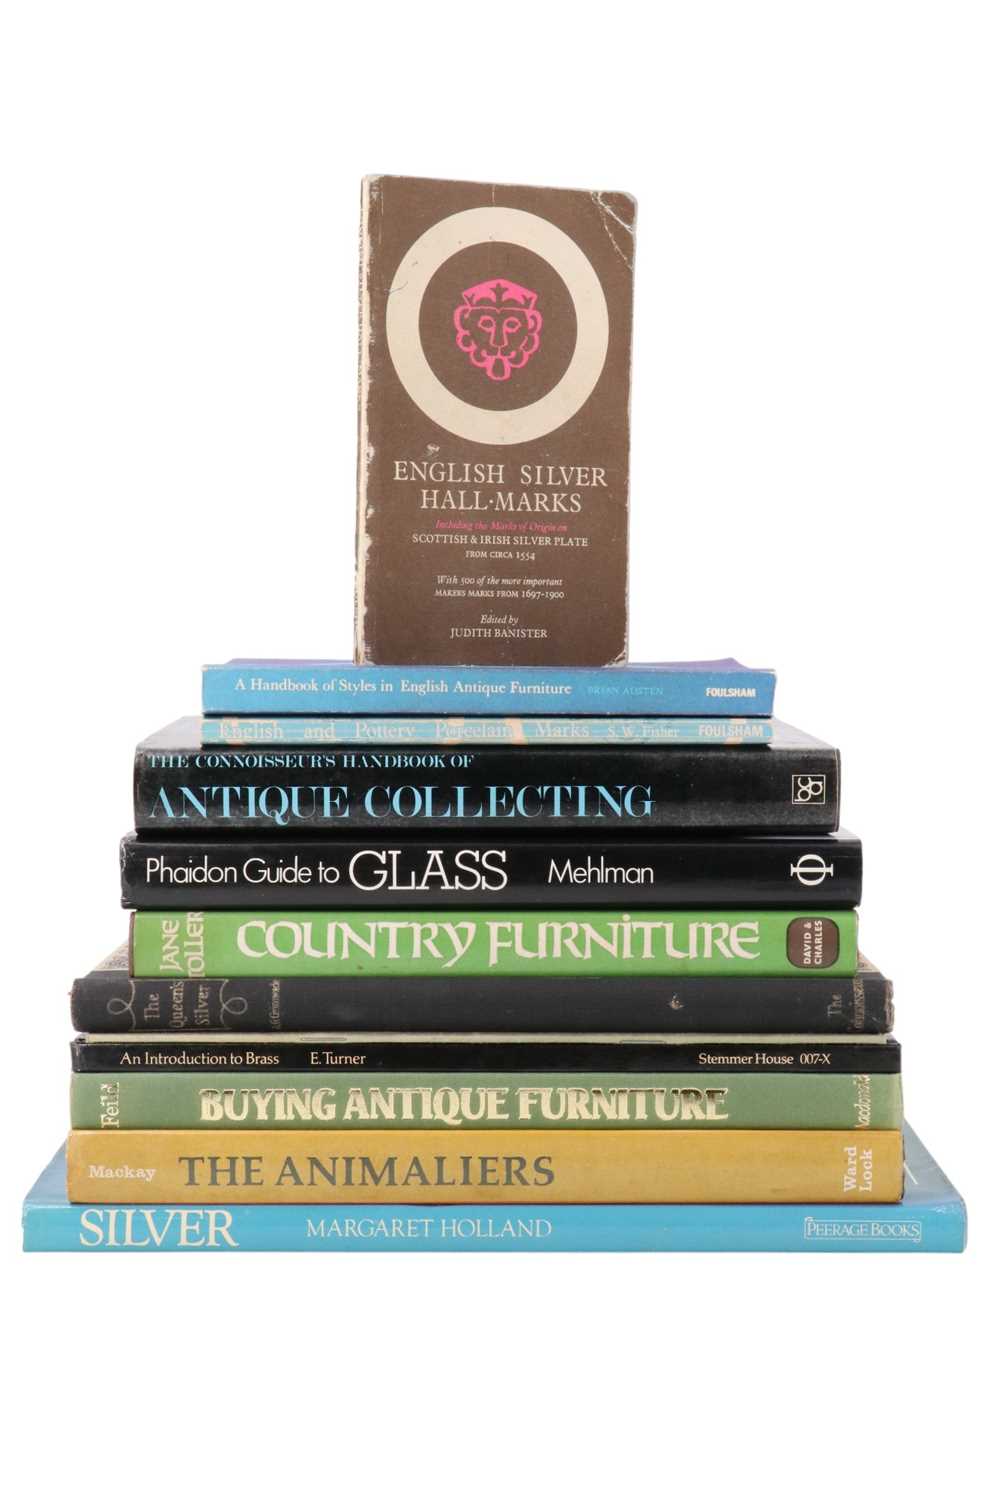 A quantity of books on antique sculpture, furniture, silver and glass etc